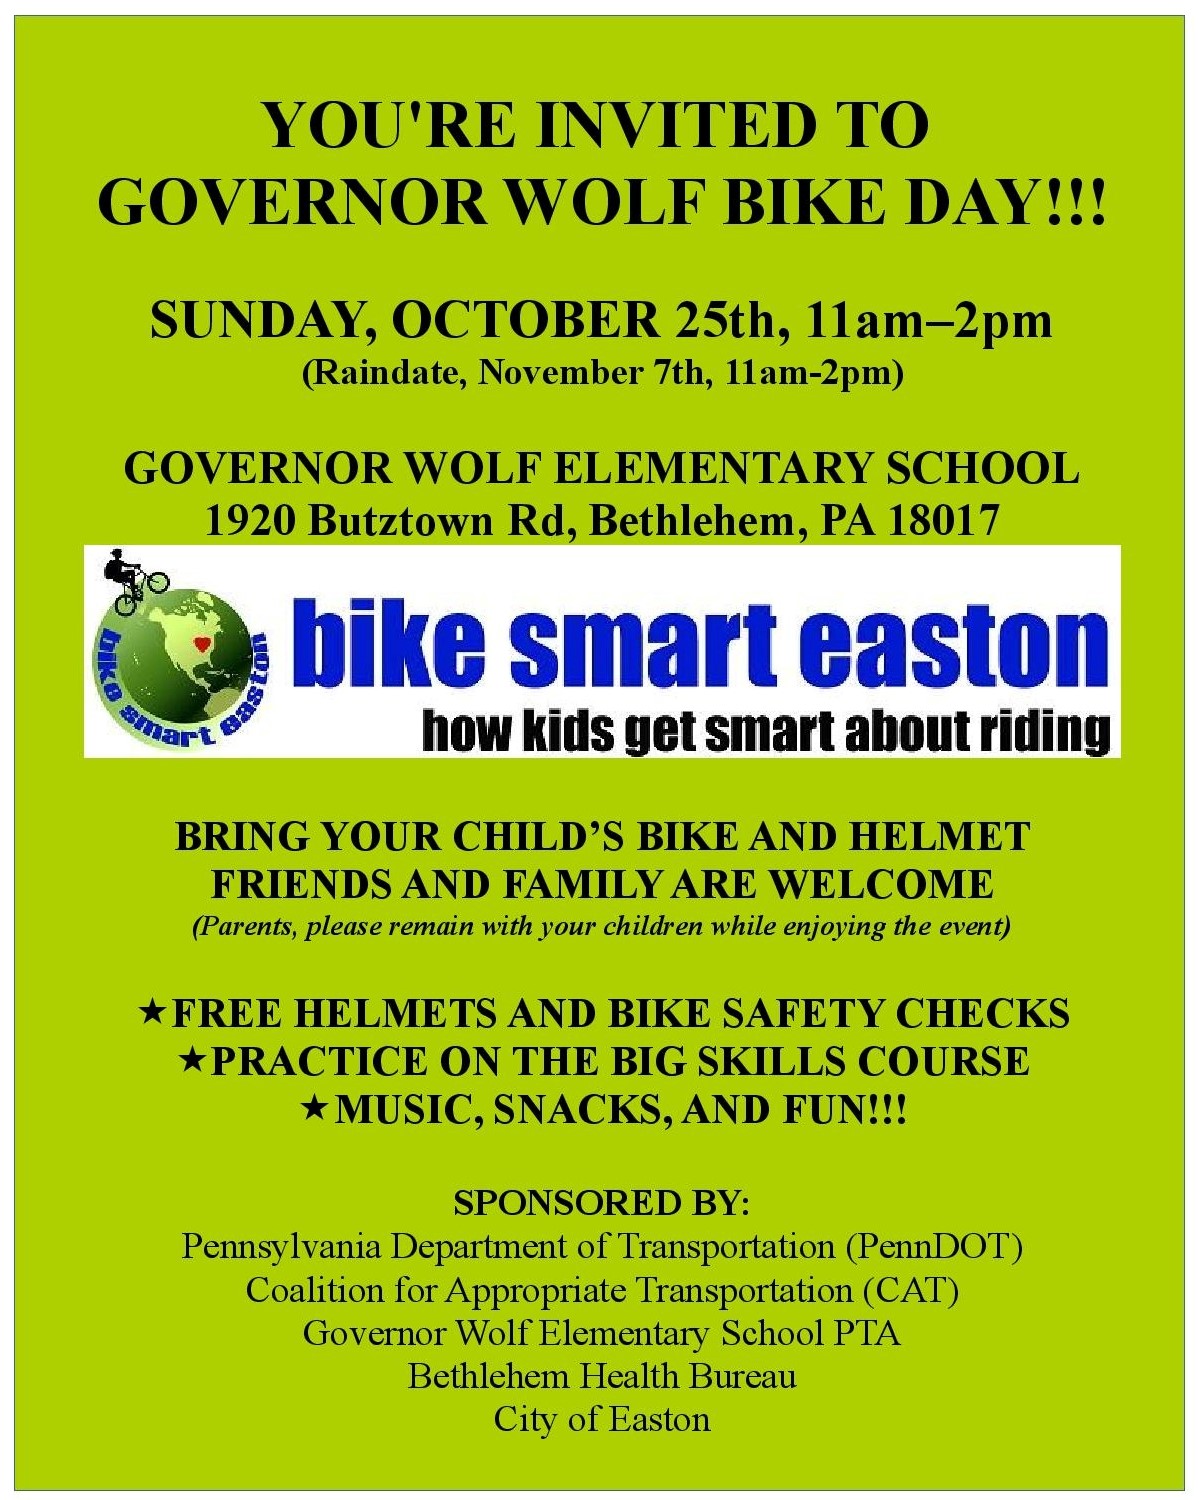 Bike Day comes to Governor Wolf Elementary School in Bethlehem!